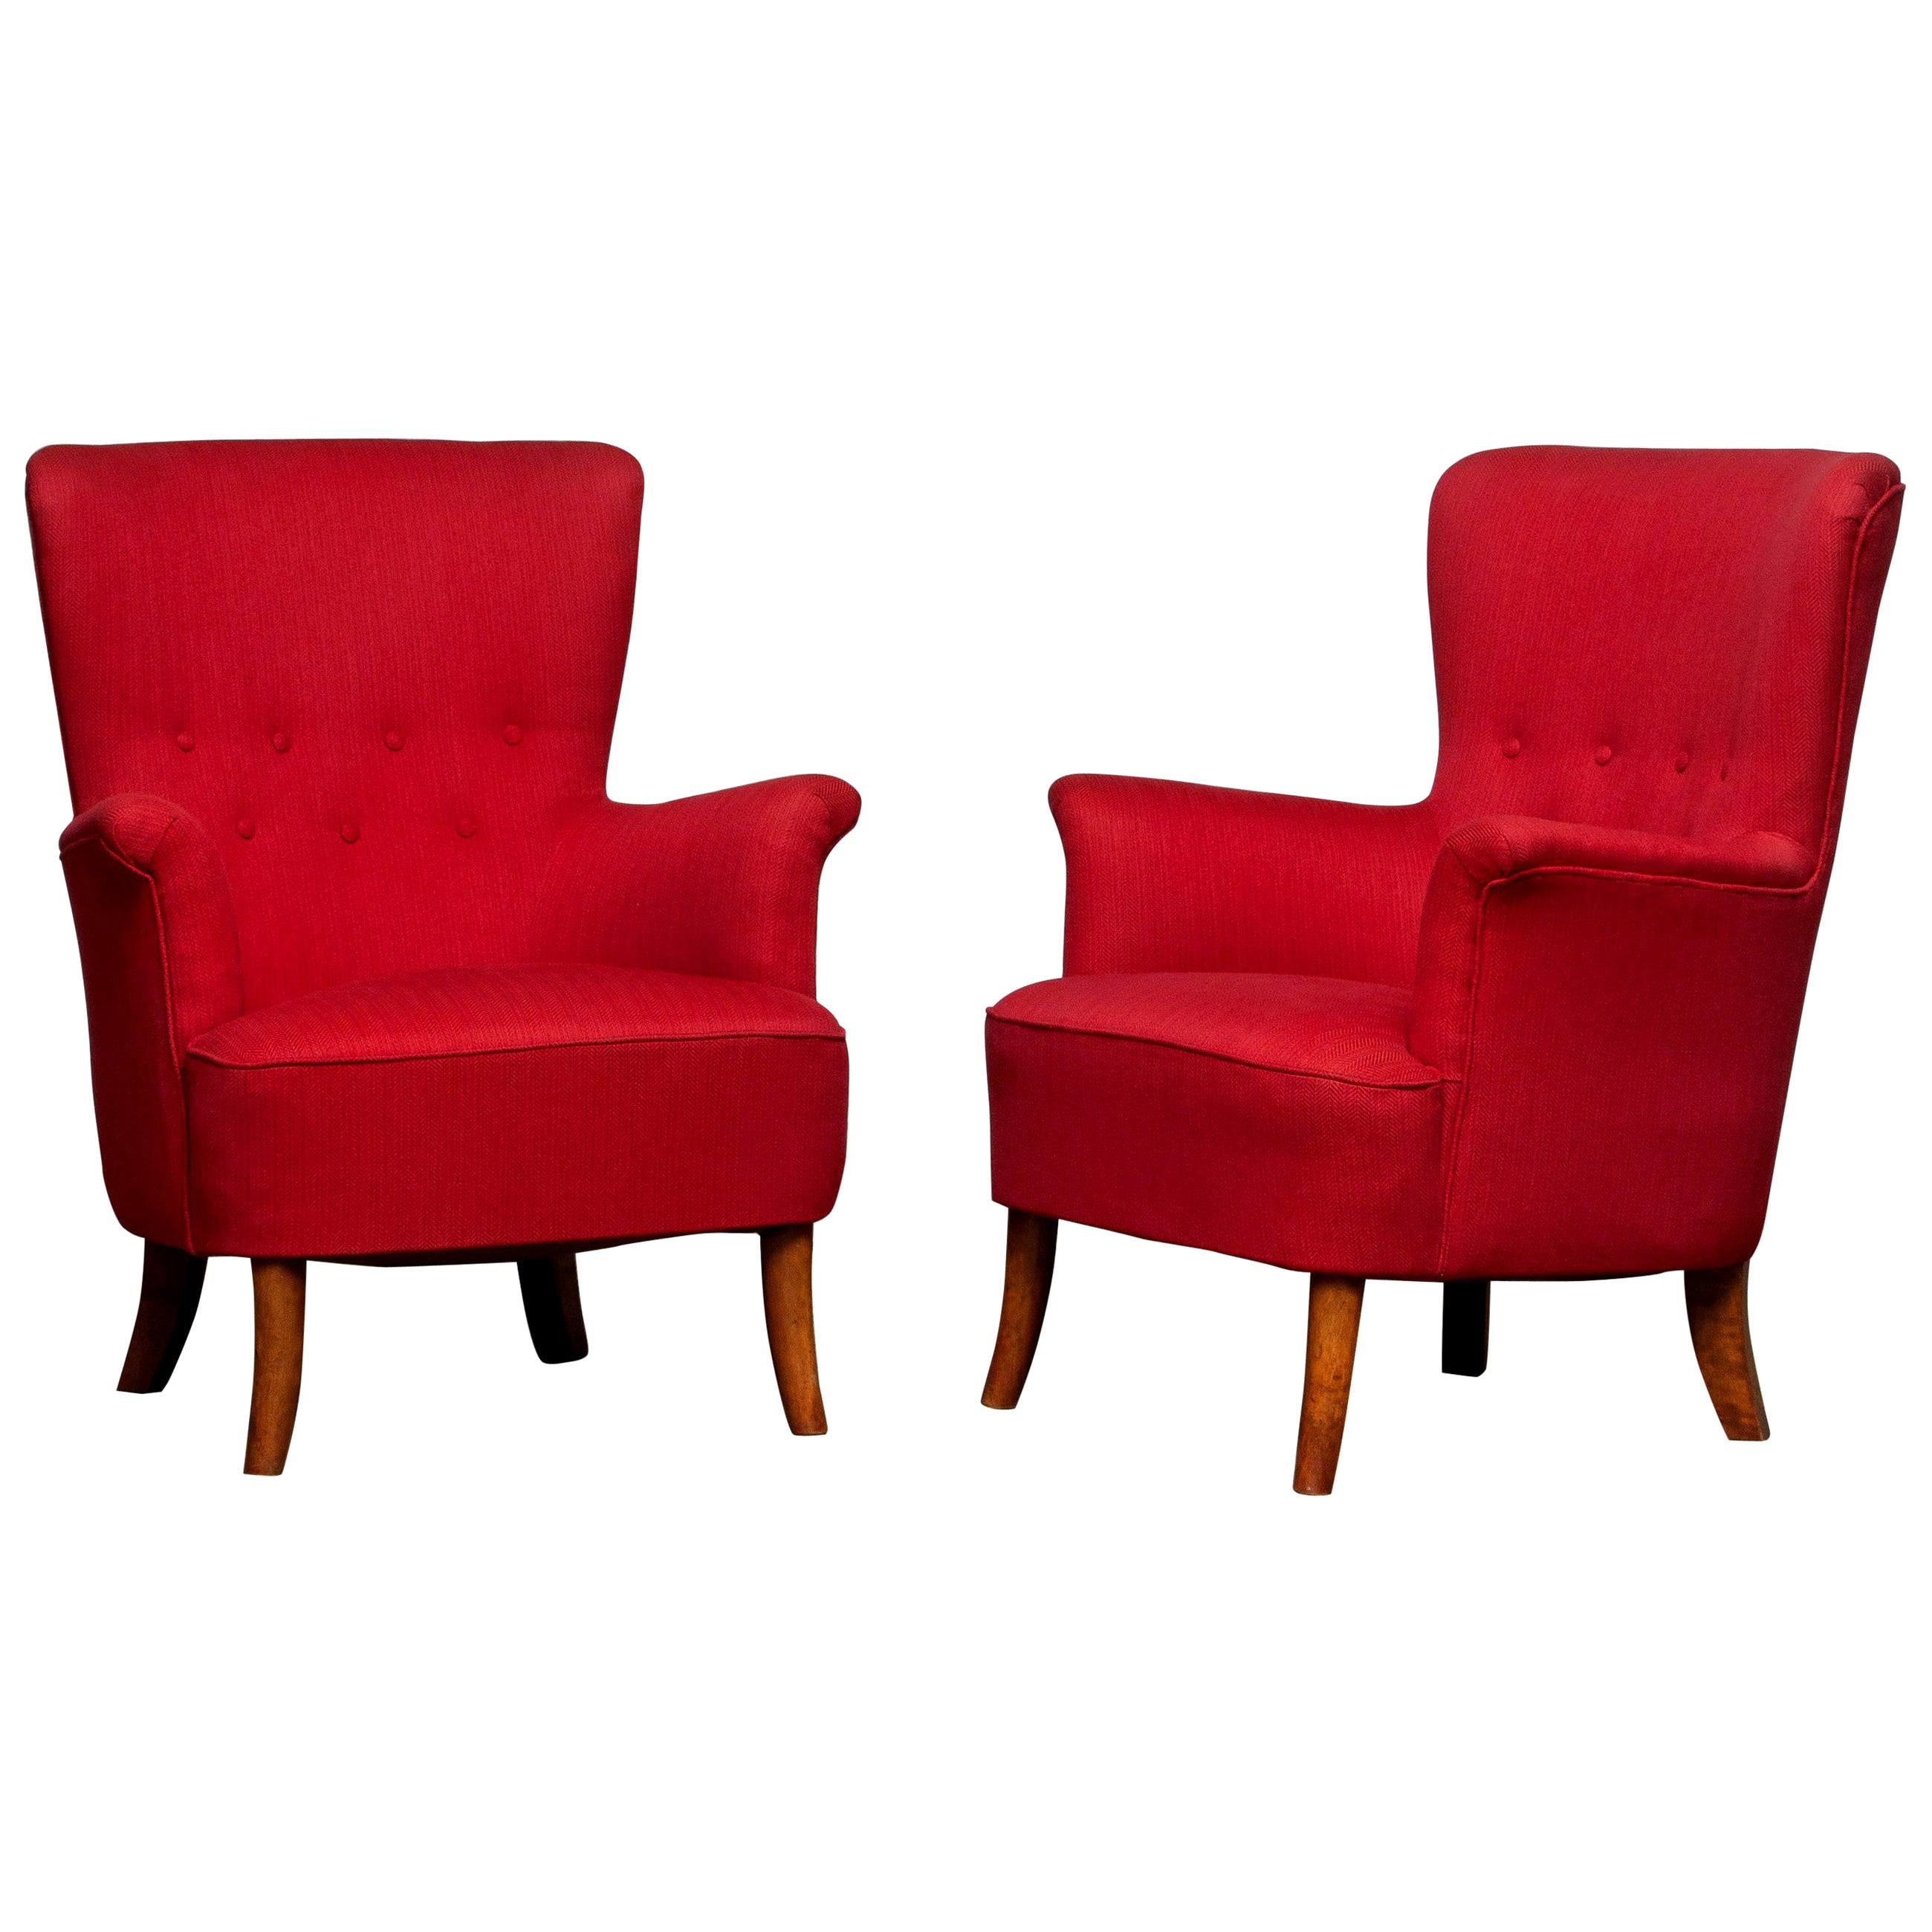 1940s, Pair of Fuchsia Easy or Lounge Chair by Carl Malmsten for Oh Sjögren